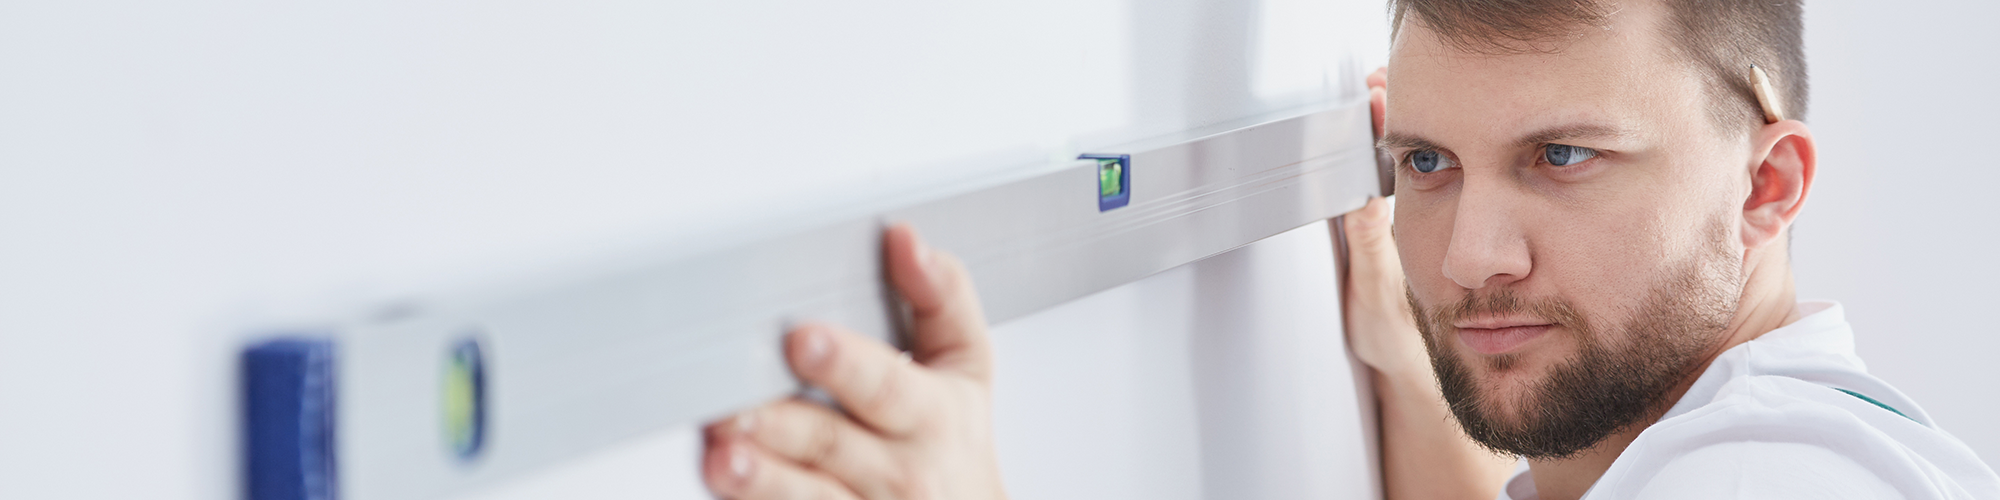 Flat Survey for a Leasehold Flat: Why you need a homebuyers survey for your flat, from SAM Conveyancing. A RICS Surveyor assesses the walls with a spirit level during a flat survey.